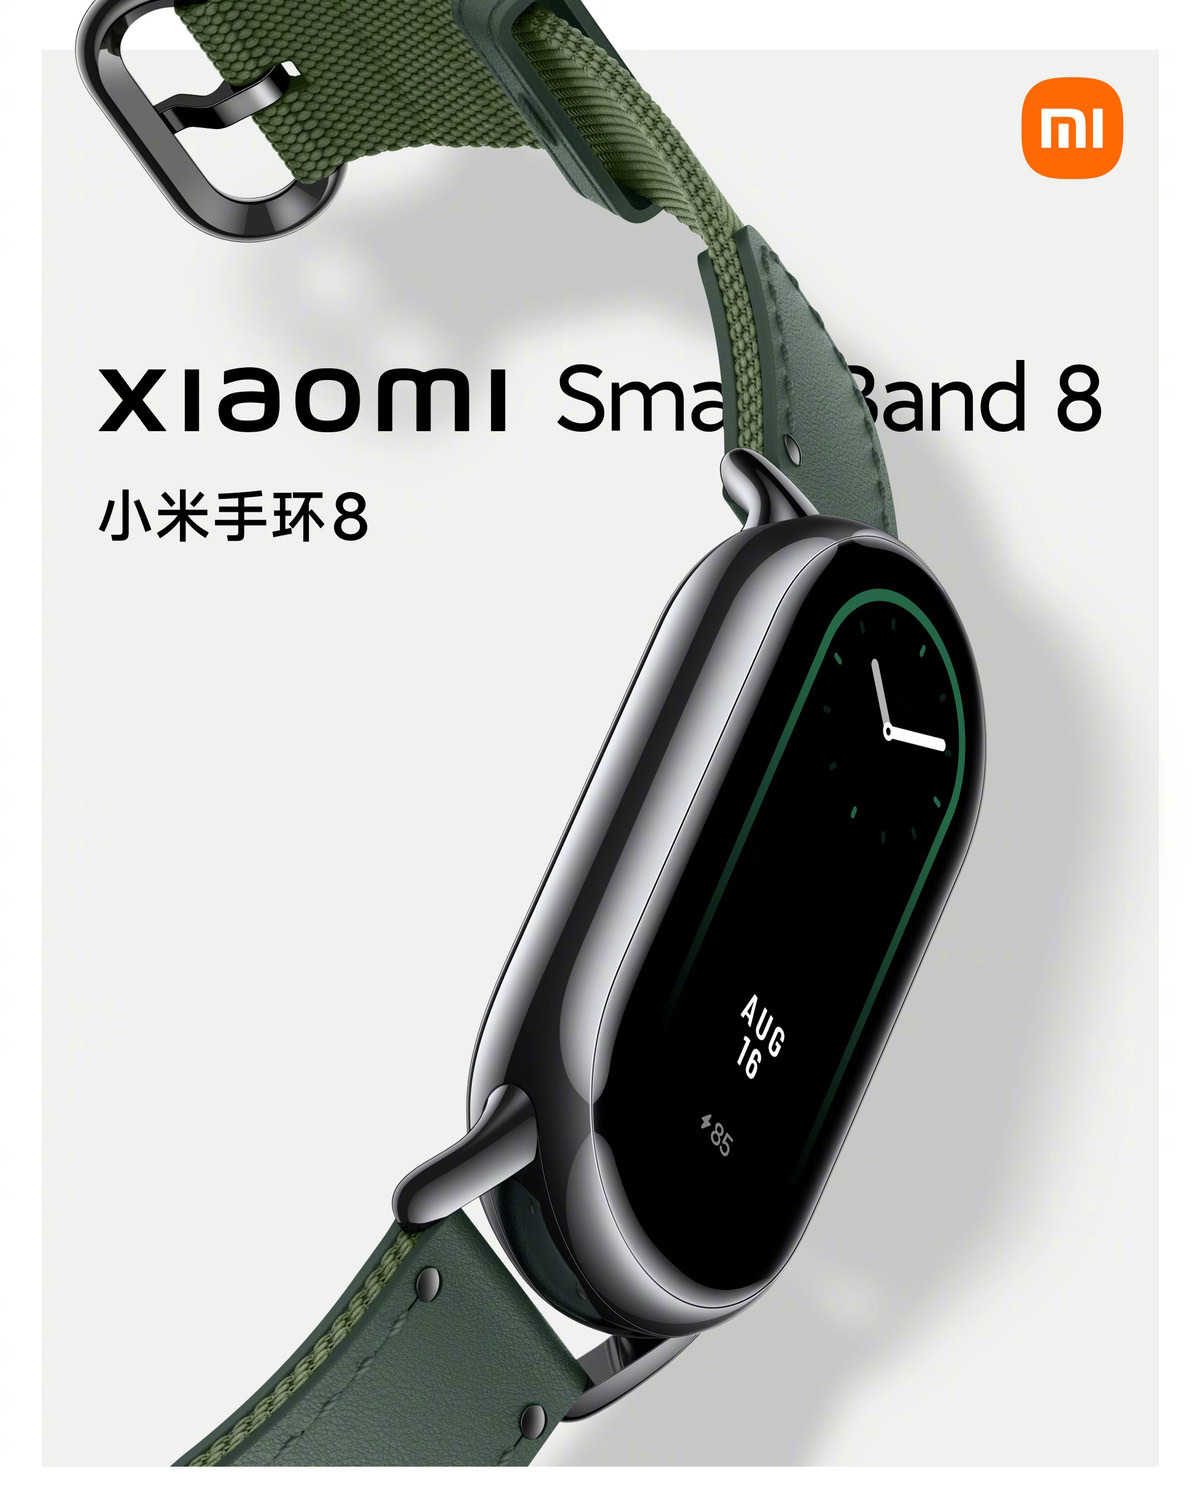 Xiaomi Mi Band 8: Features, Price, Expected Release date